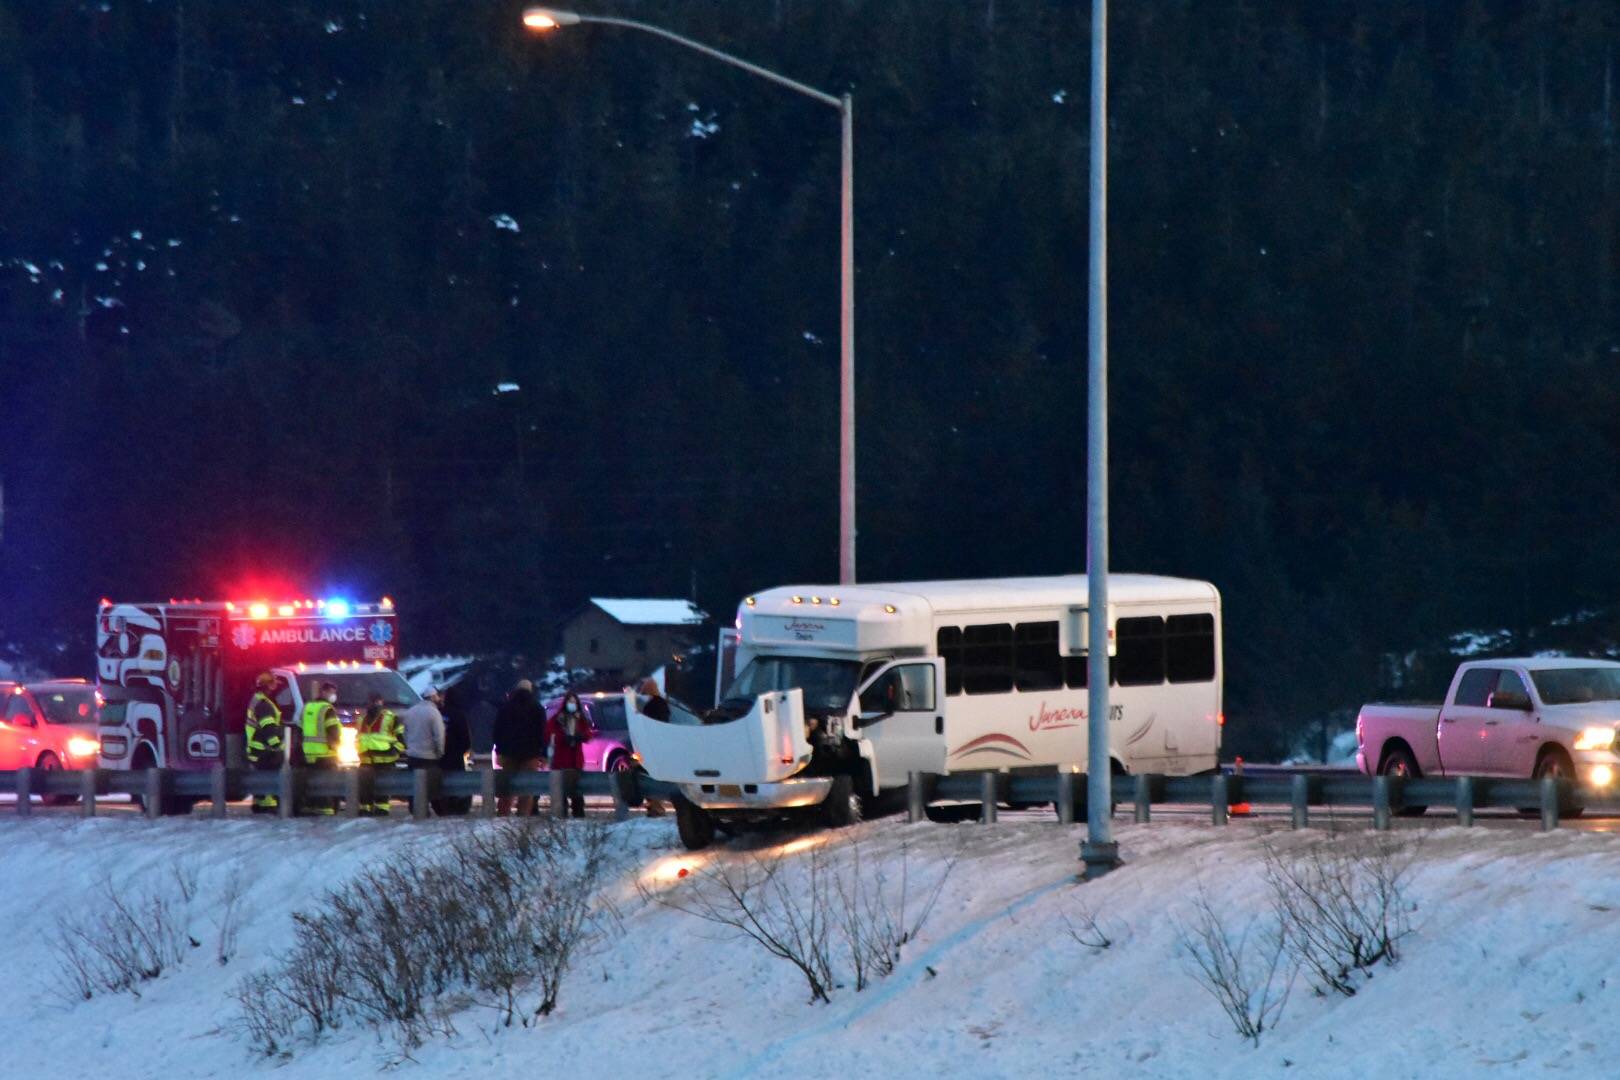 A Juneau Tours minibus crashed into a guardrail on Egan Drive near Twin Lakes for reasons unknown on Feb. 15, 2021. (Peter Segall / Juneau Empire)